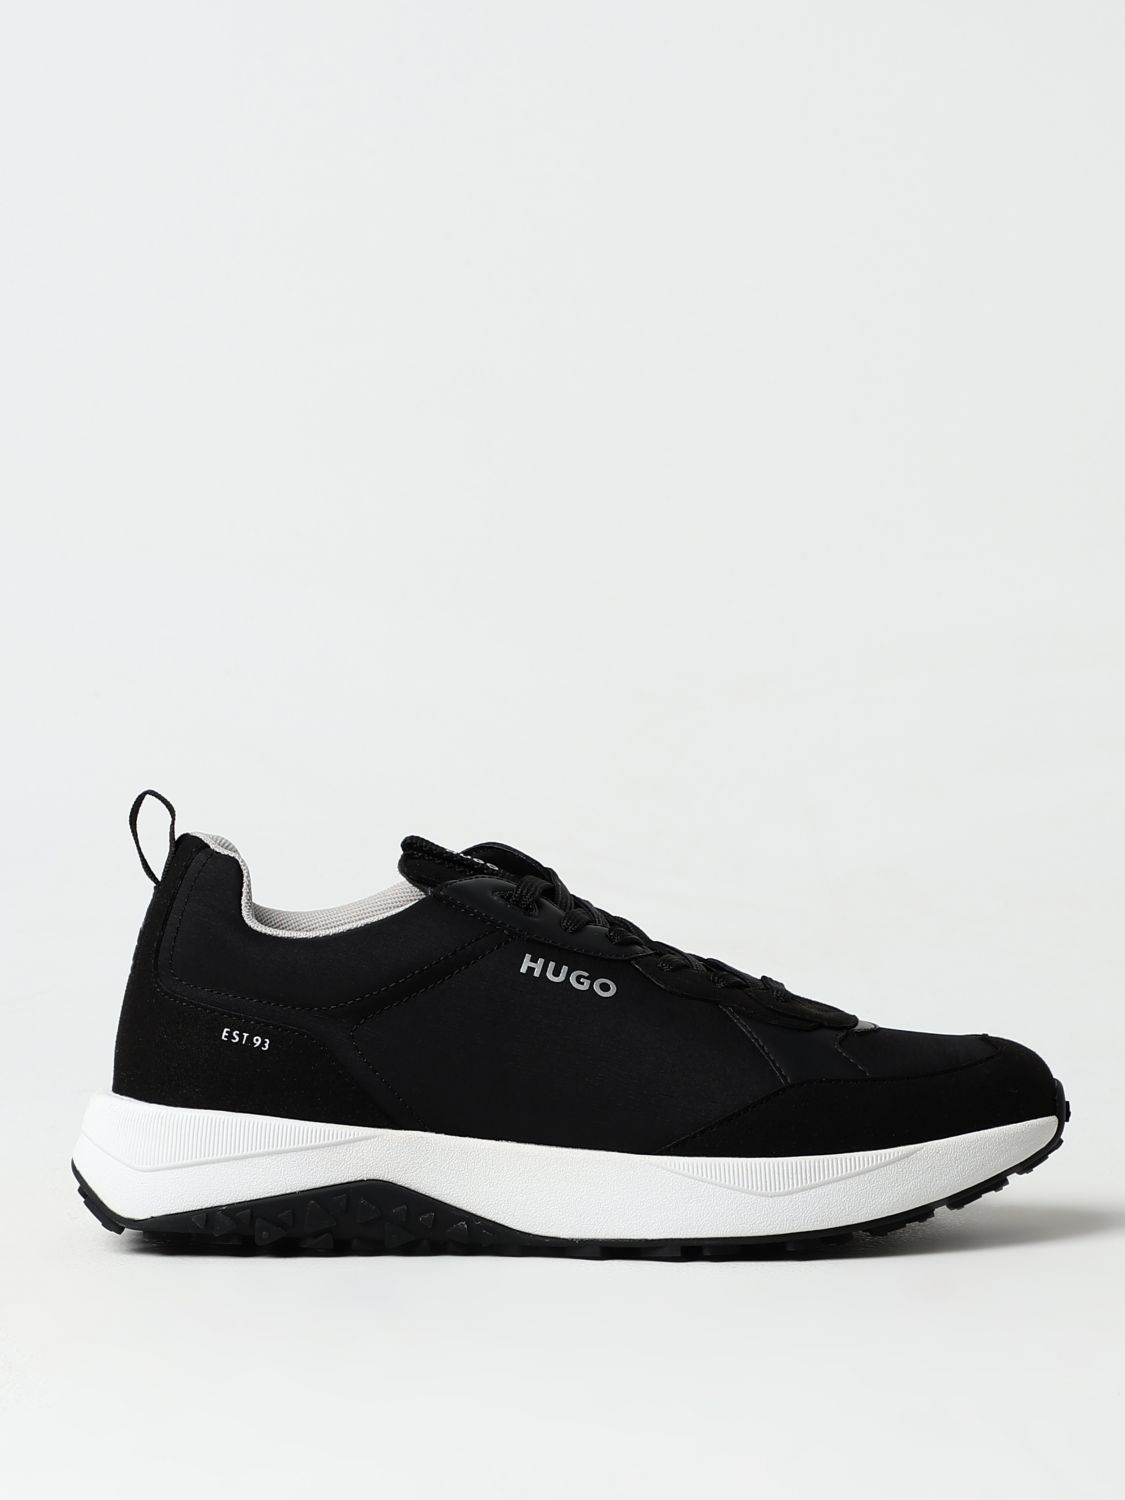 Hugo Black Mixed Material Trainers